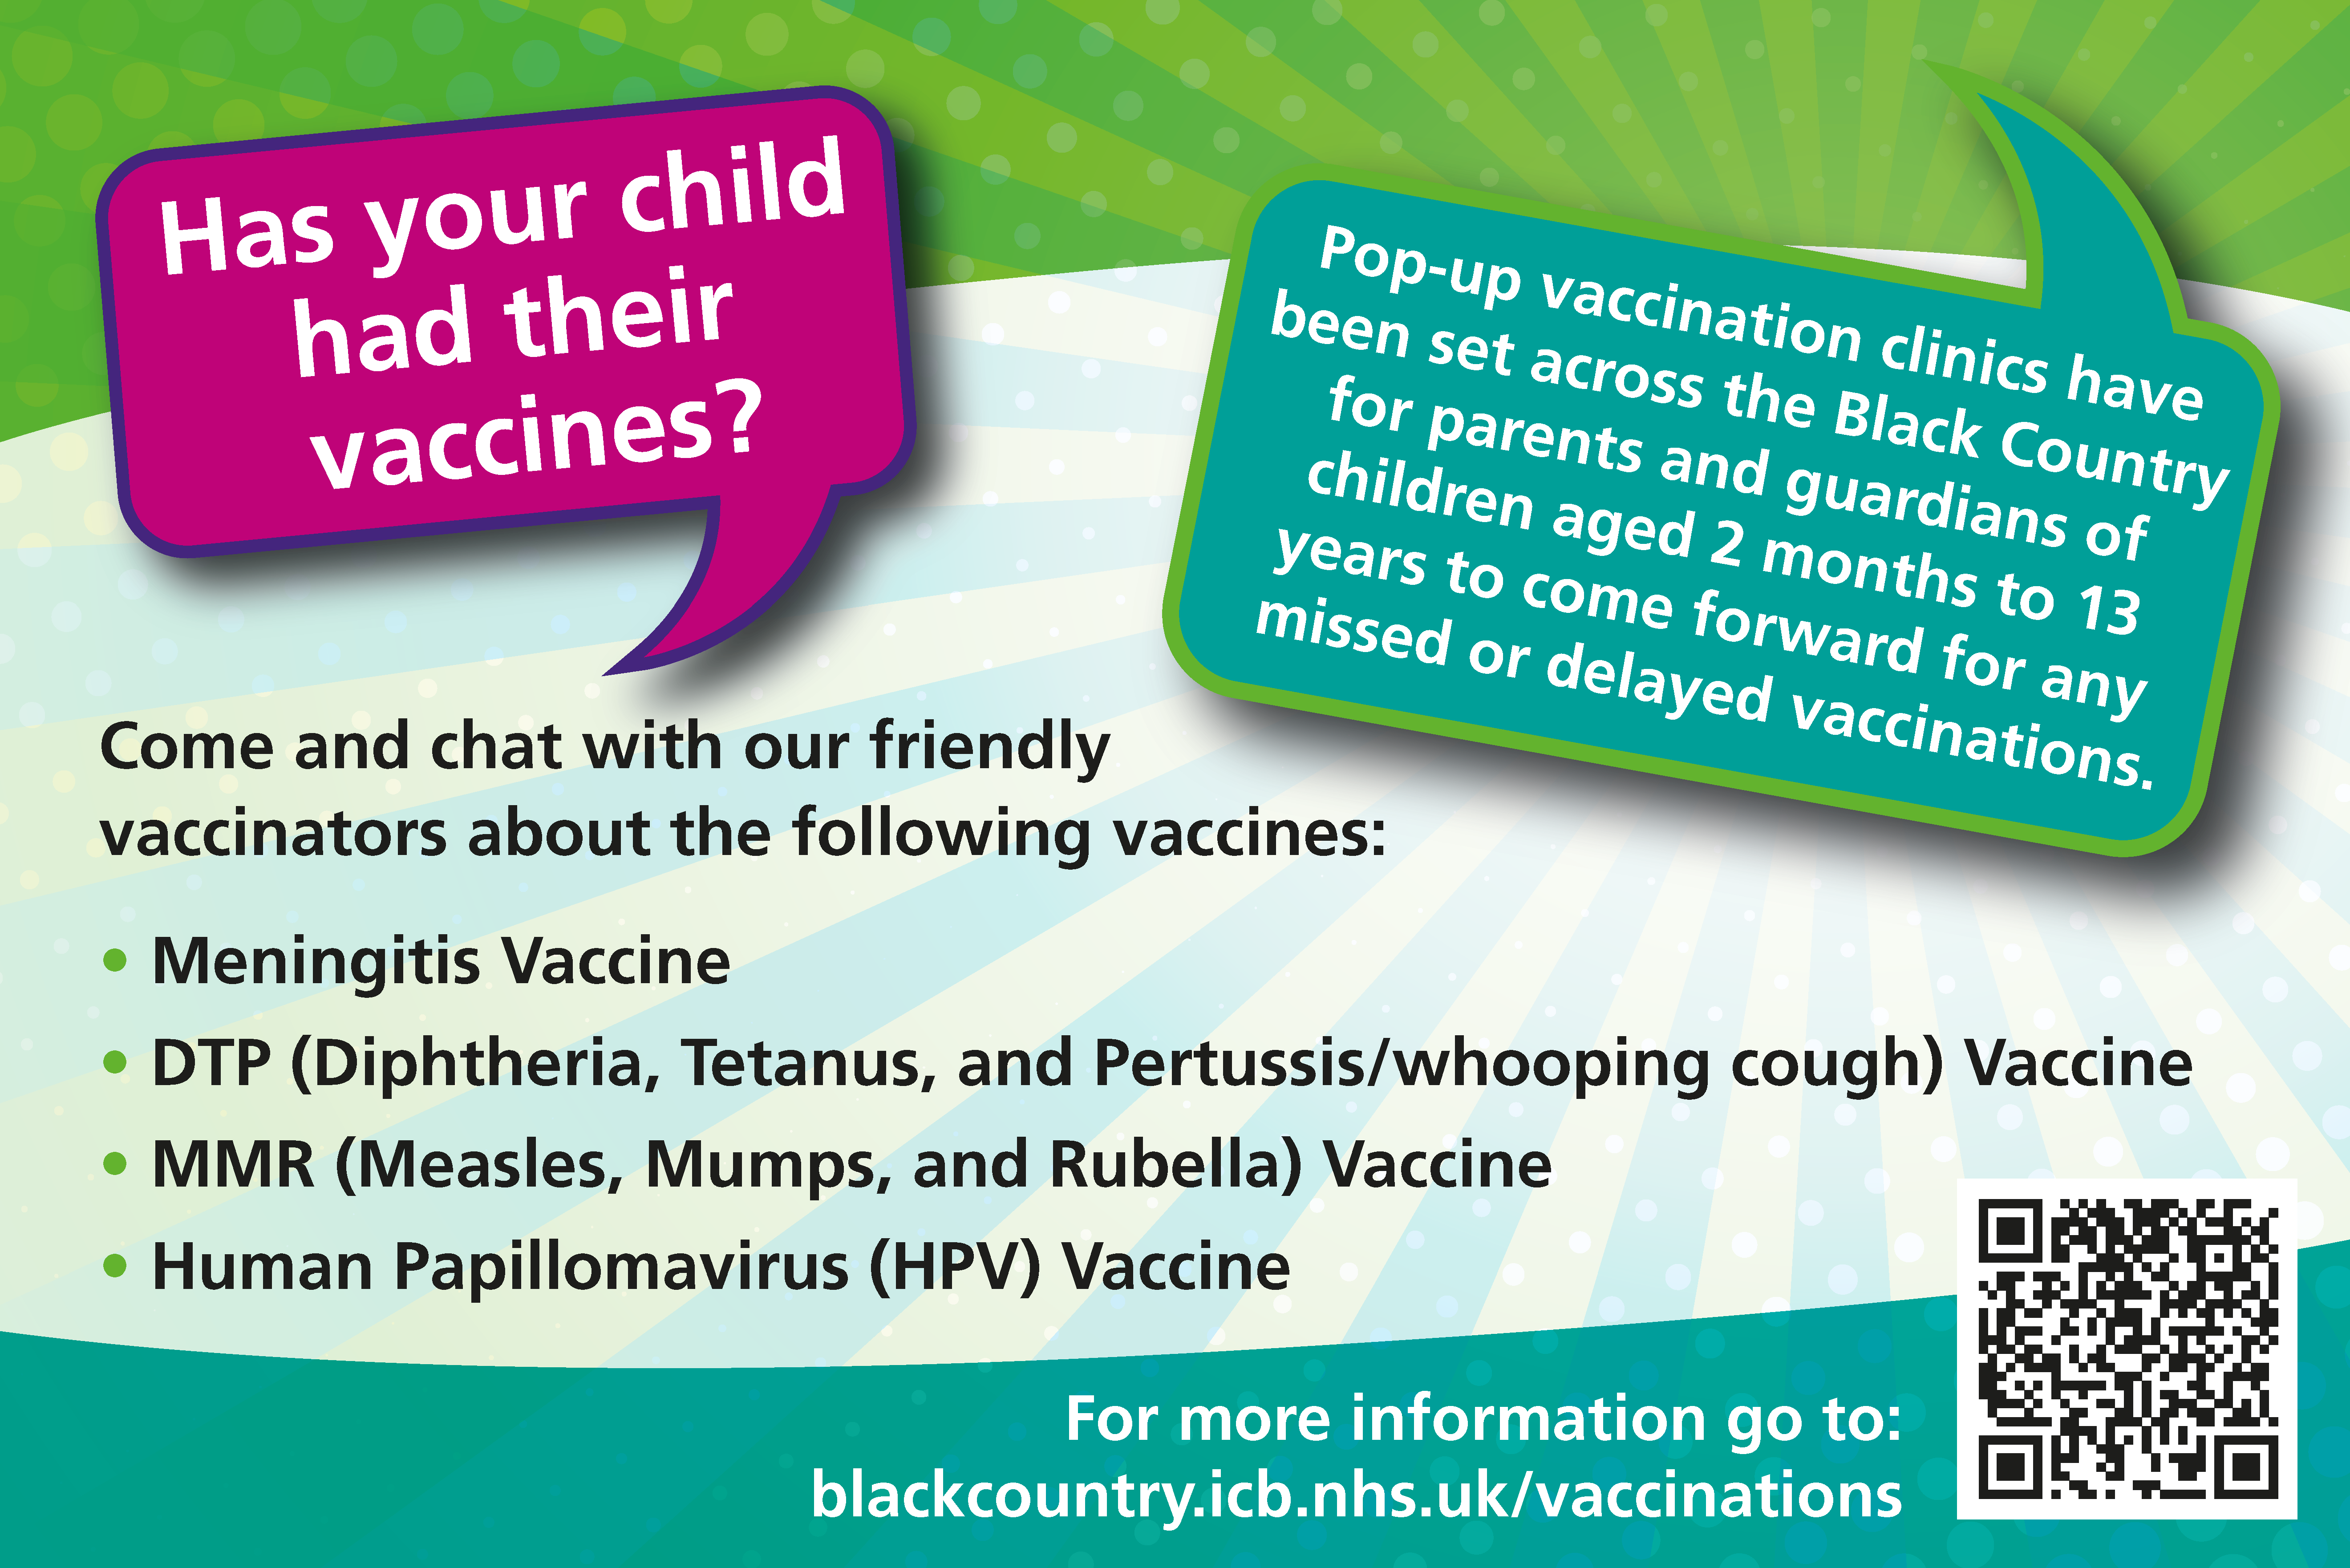 Pop-up child vaccine clinics in the Black Country